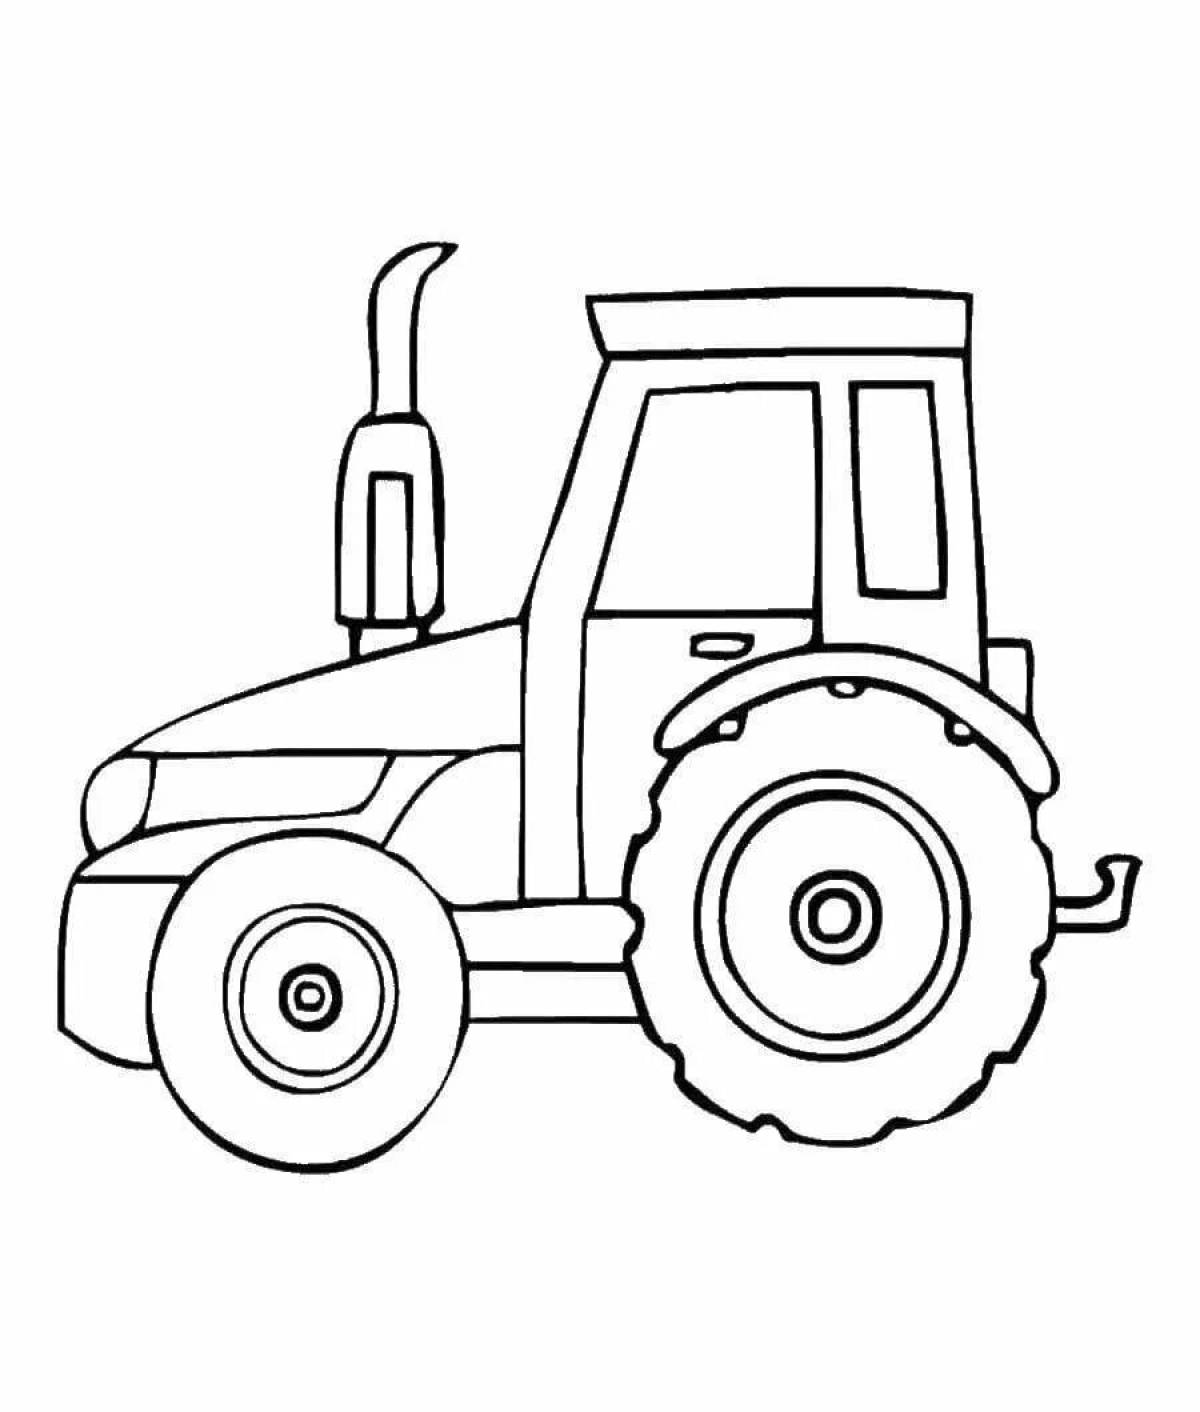 Drawing tractor for kids #8